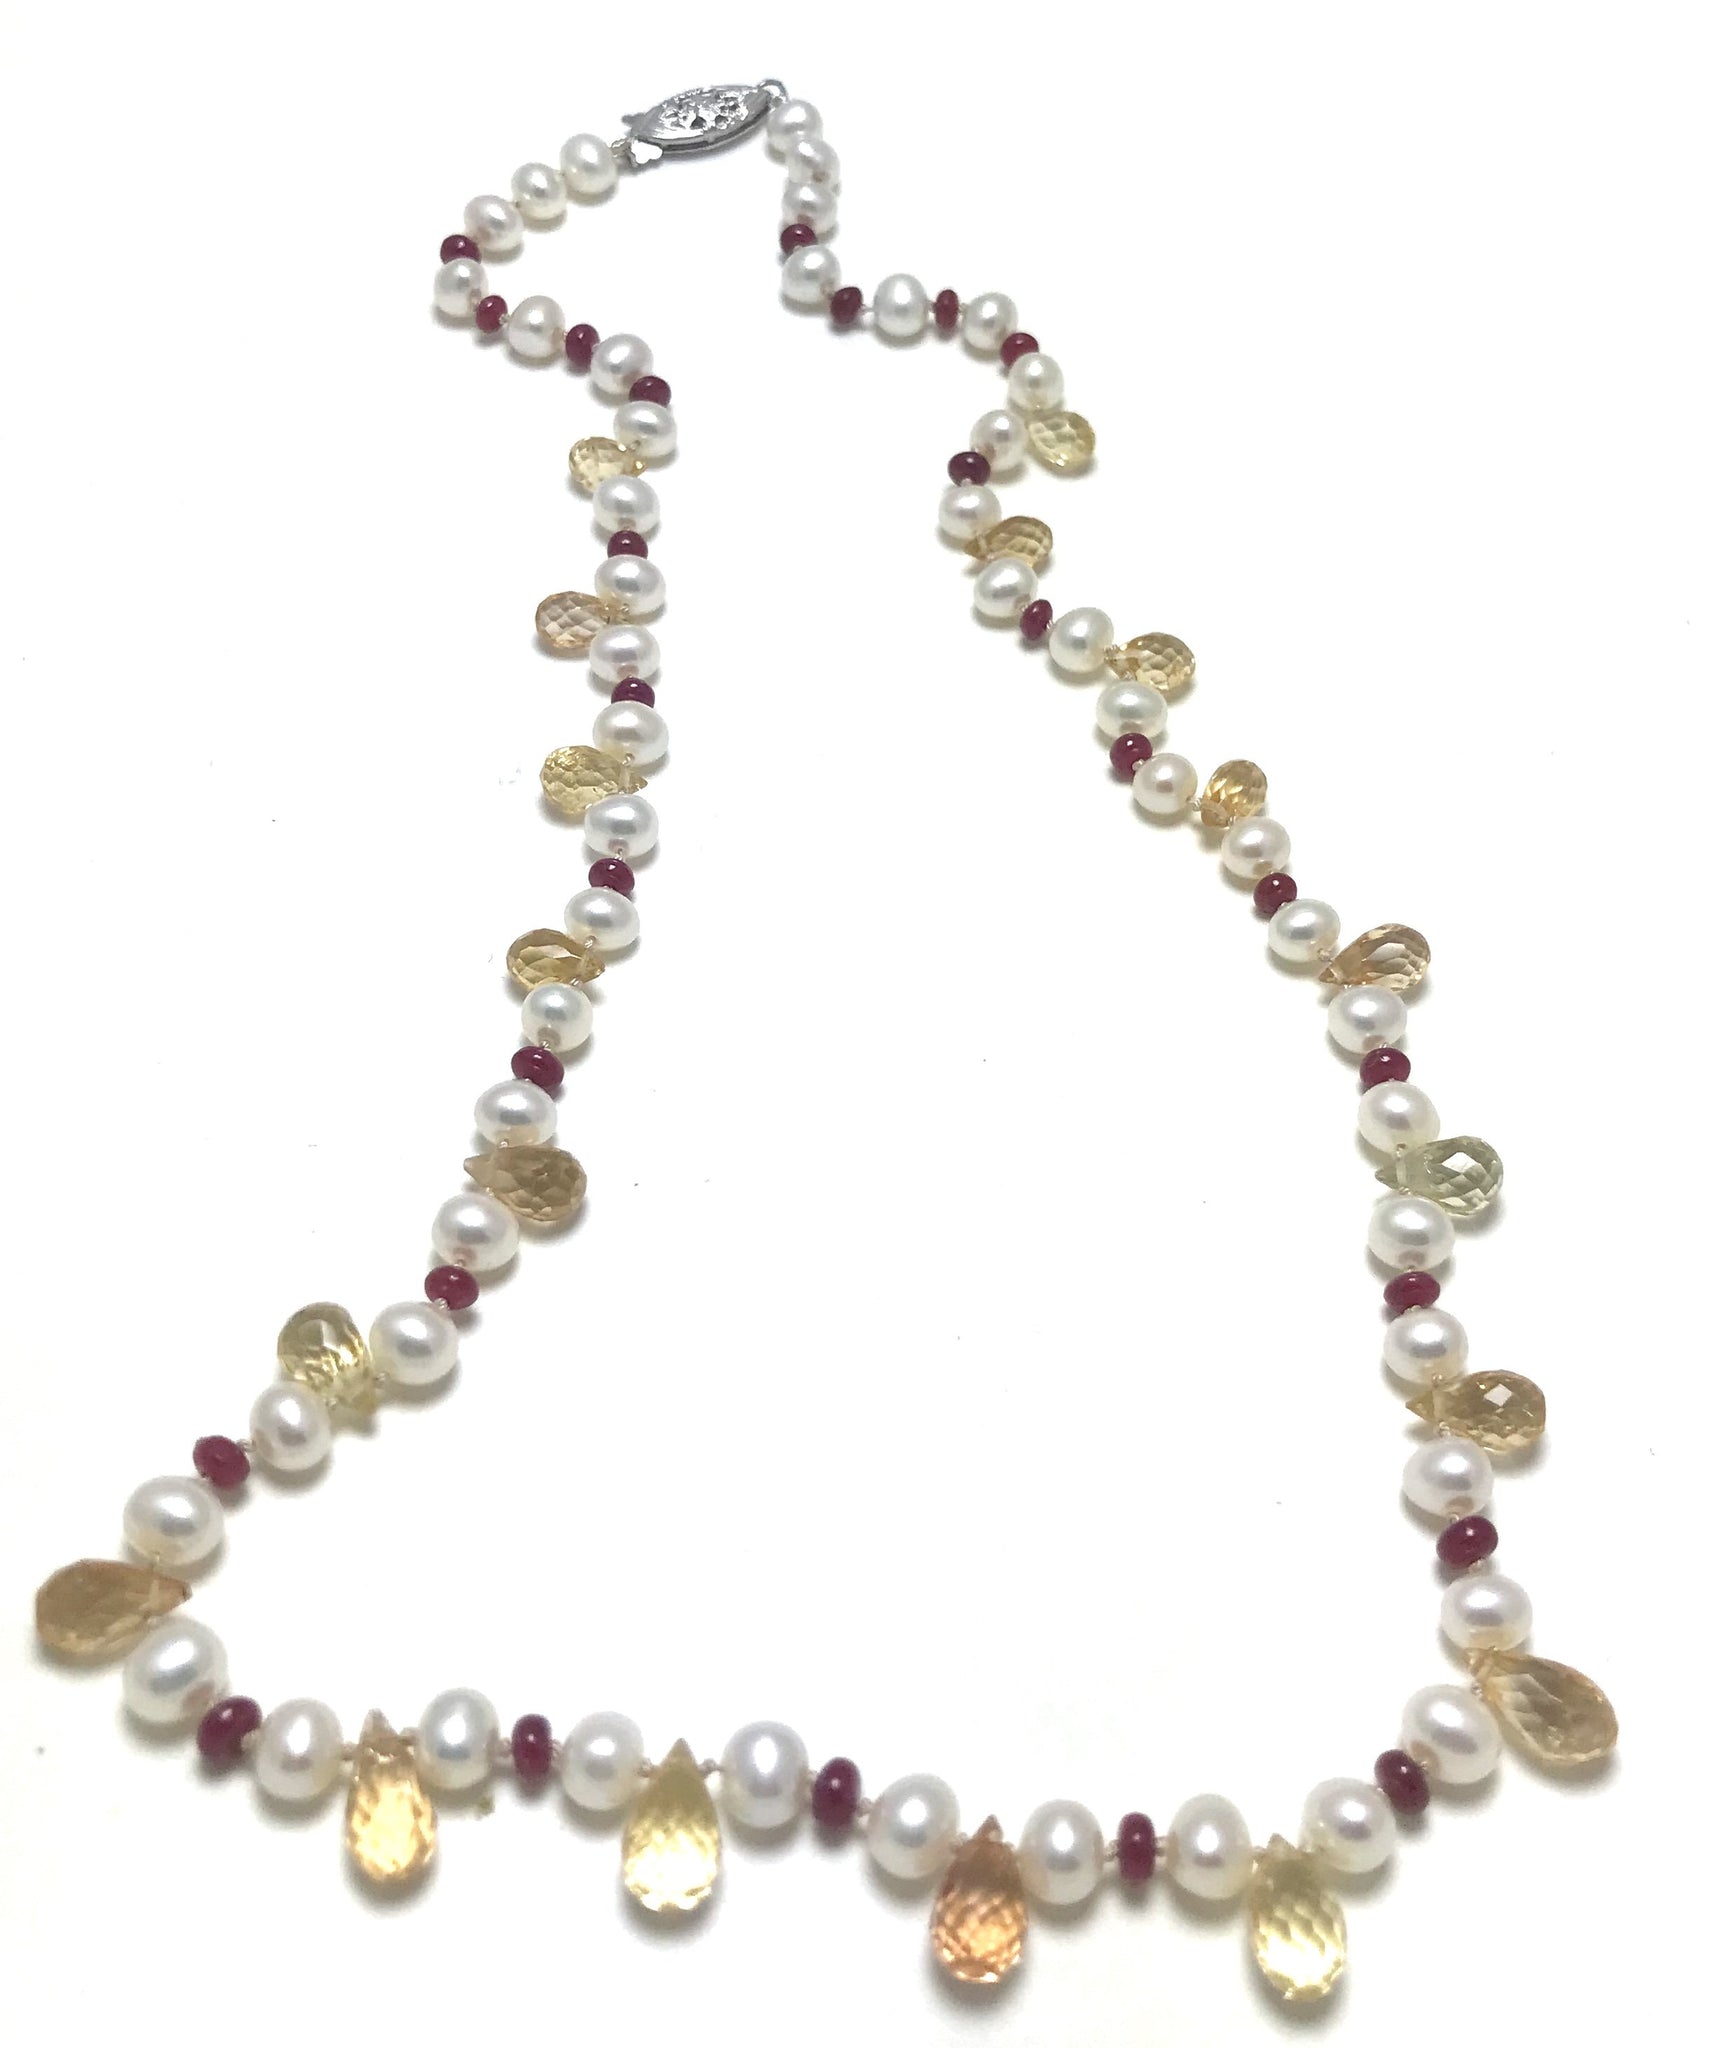 A pearl knotted piece with white pearls, yellow topaz and red rubies.    